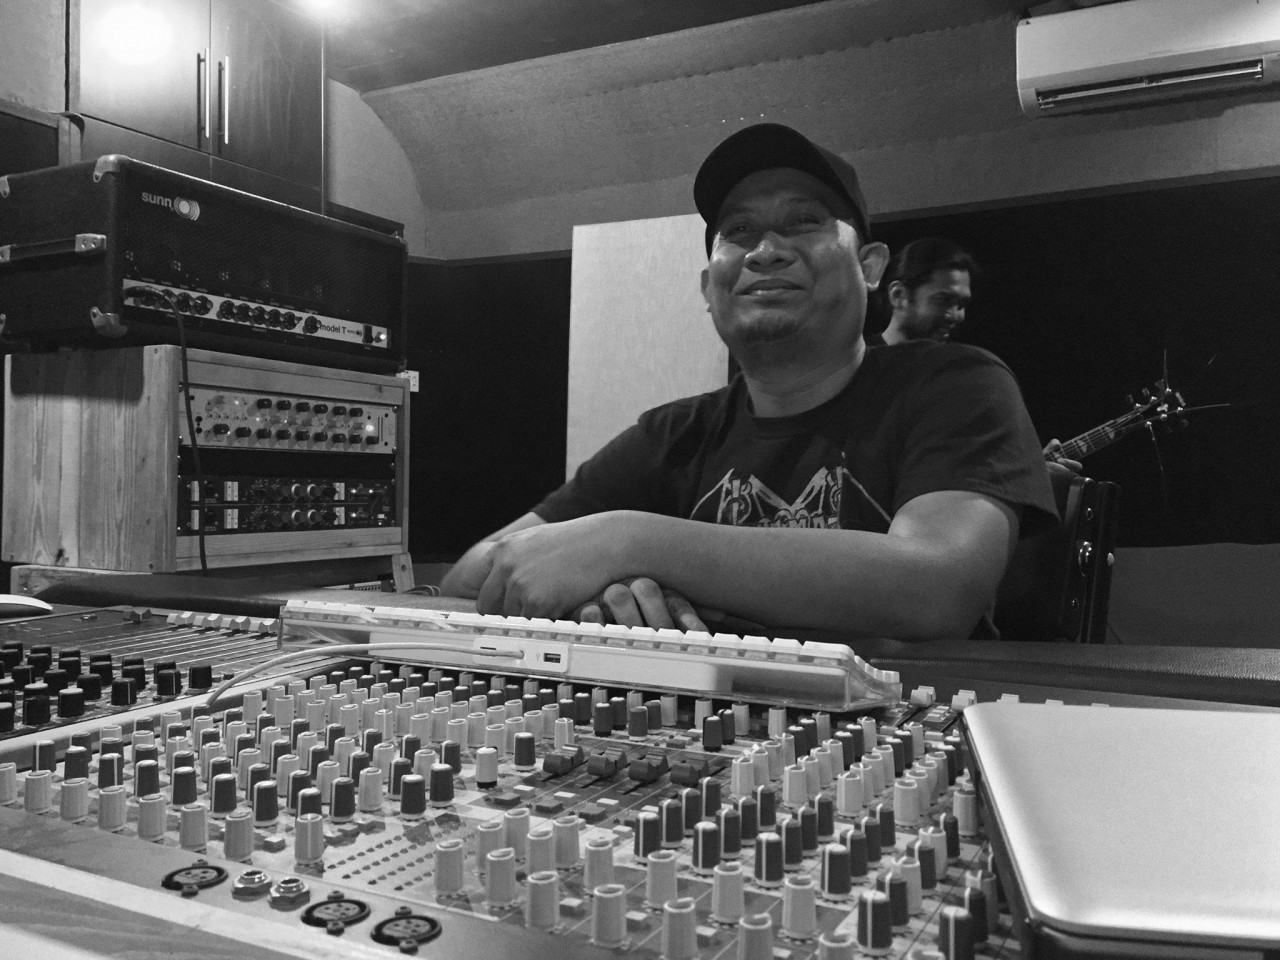 Mohd Fadillah Osman says many musicians are taking their live shows online in an effort to earn some money. – Pic courtesy of Fadillah, September 19, 2020